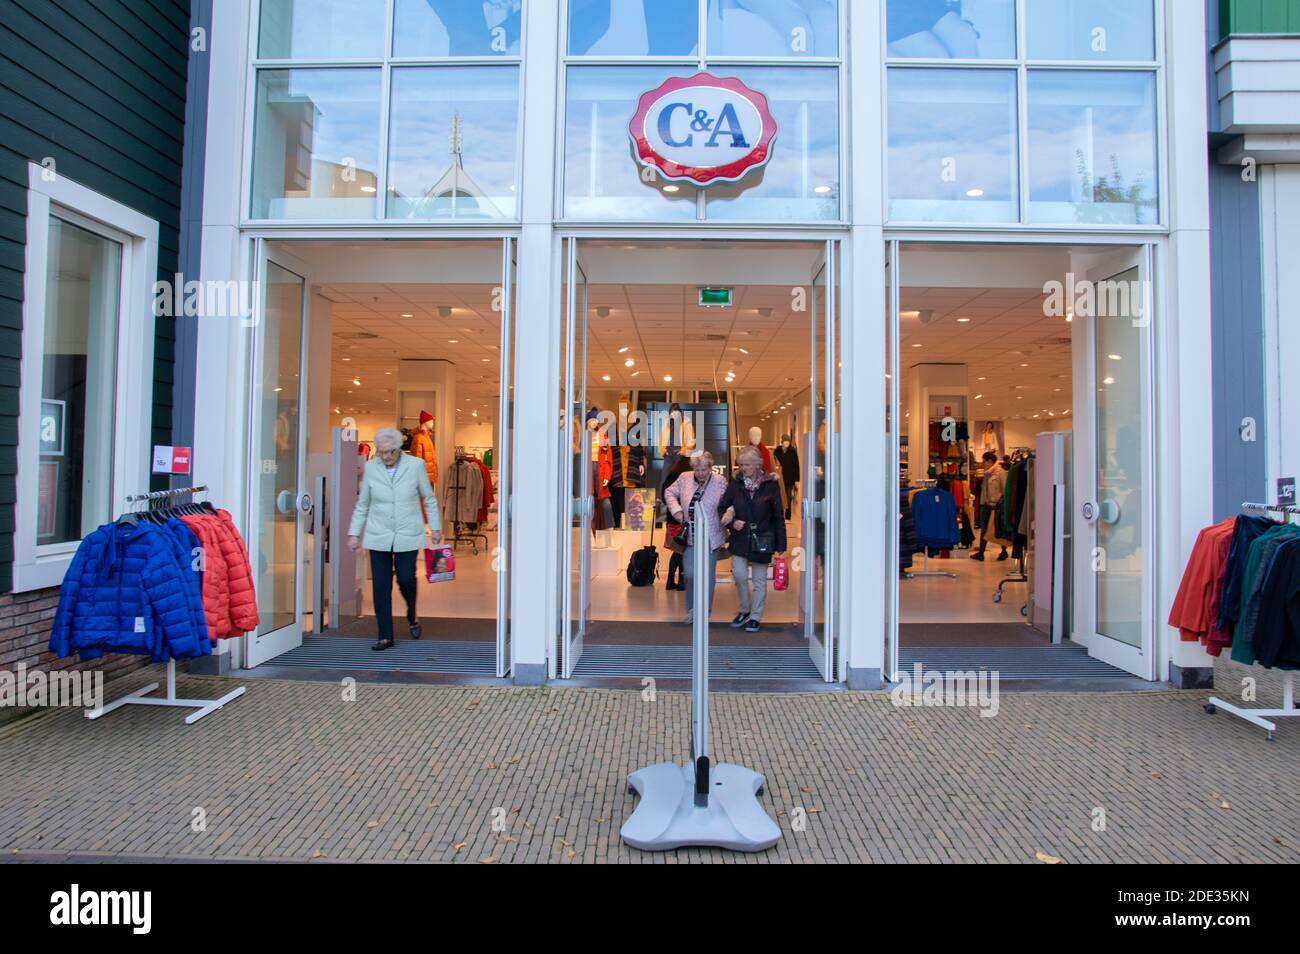 instant Contractie Concessie C&A Store At Amsterdam The Netherlands 23-10-2019 Stock Photo - Alamy